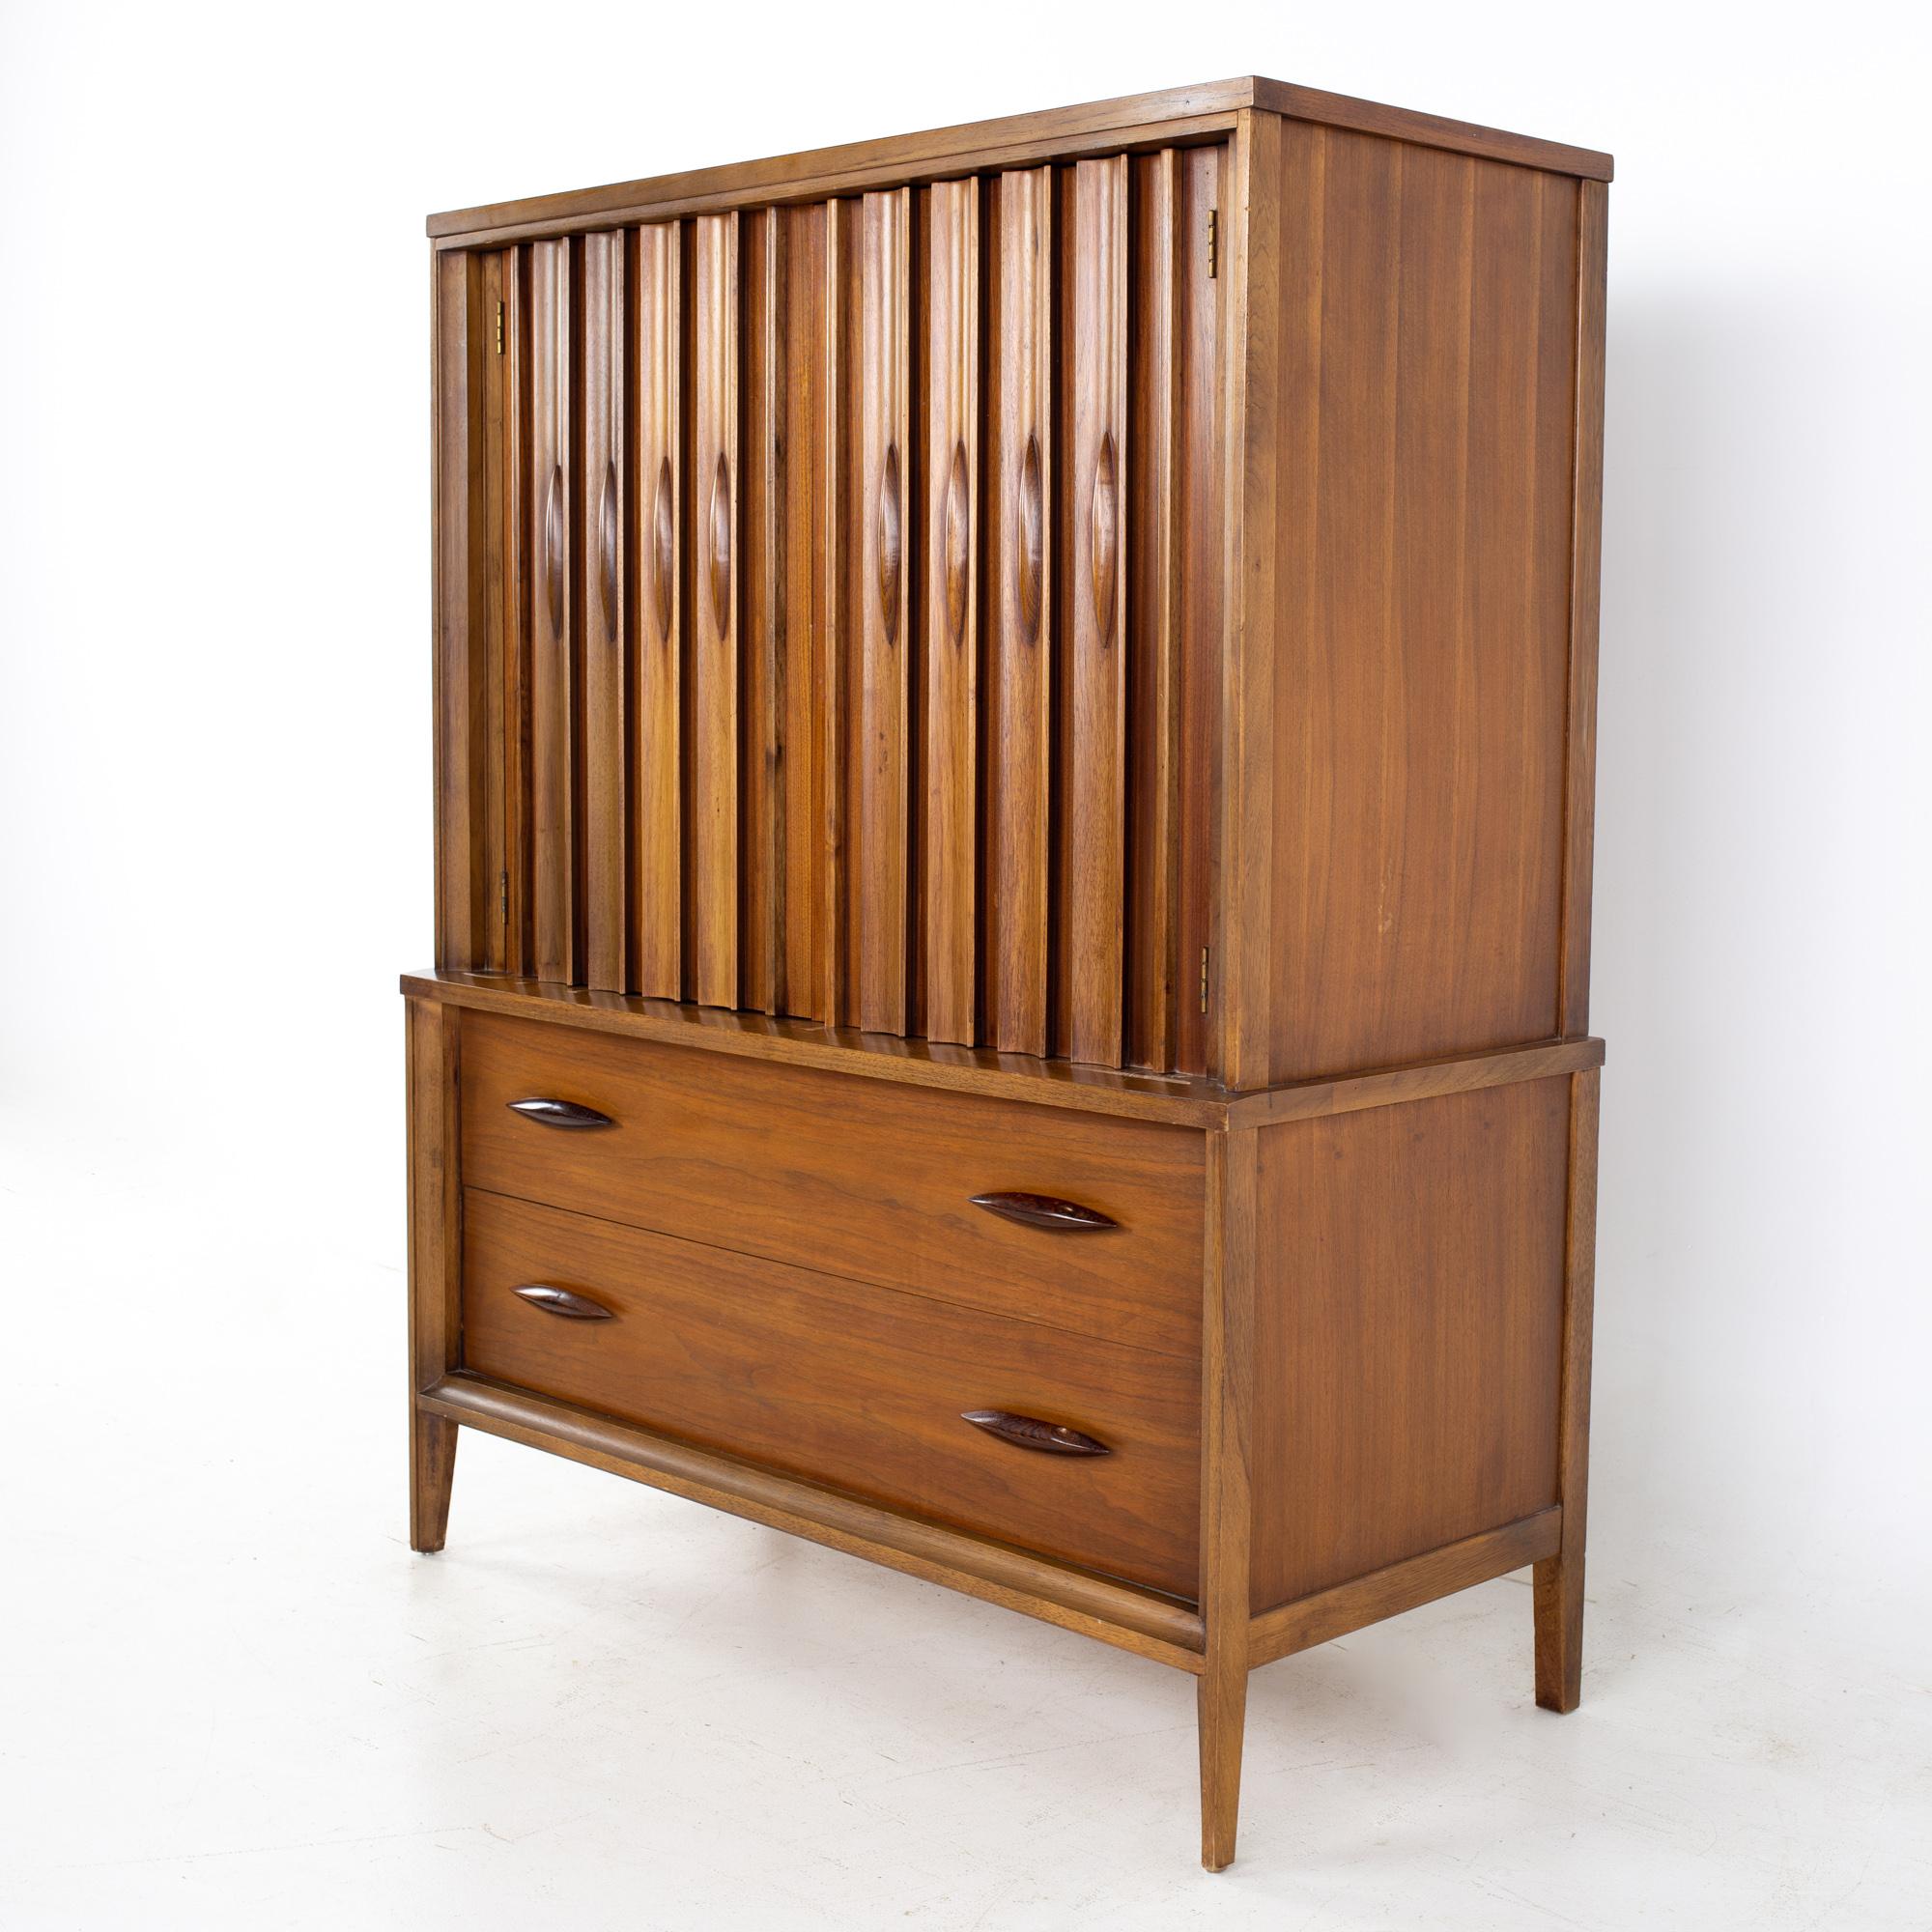 Thomasville Brutalist mid century walnut armoire gentleman's chest highboy dresser.
Dresser measures: 43 wide x 20 deep x 54 inches high

All pieces of furniture can be had in what we call restored vintage condition. That means the piece is